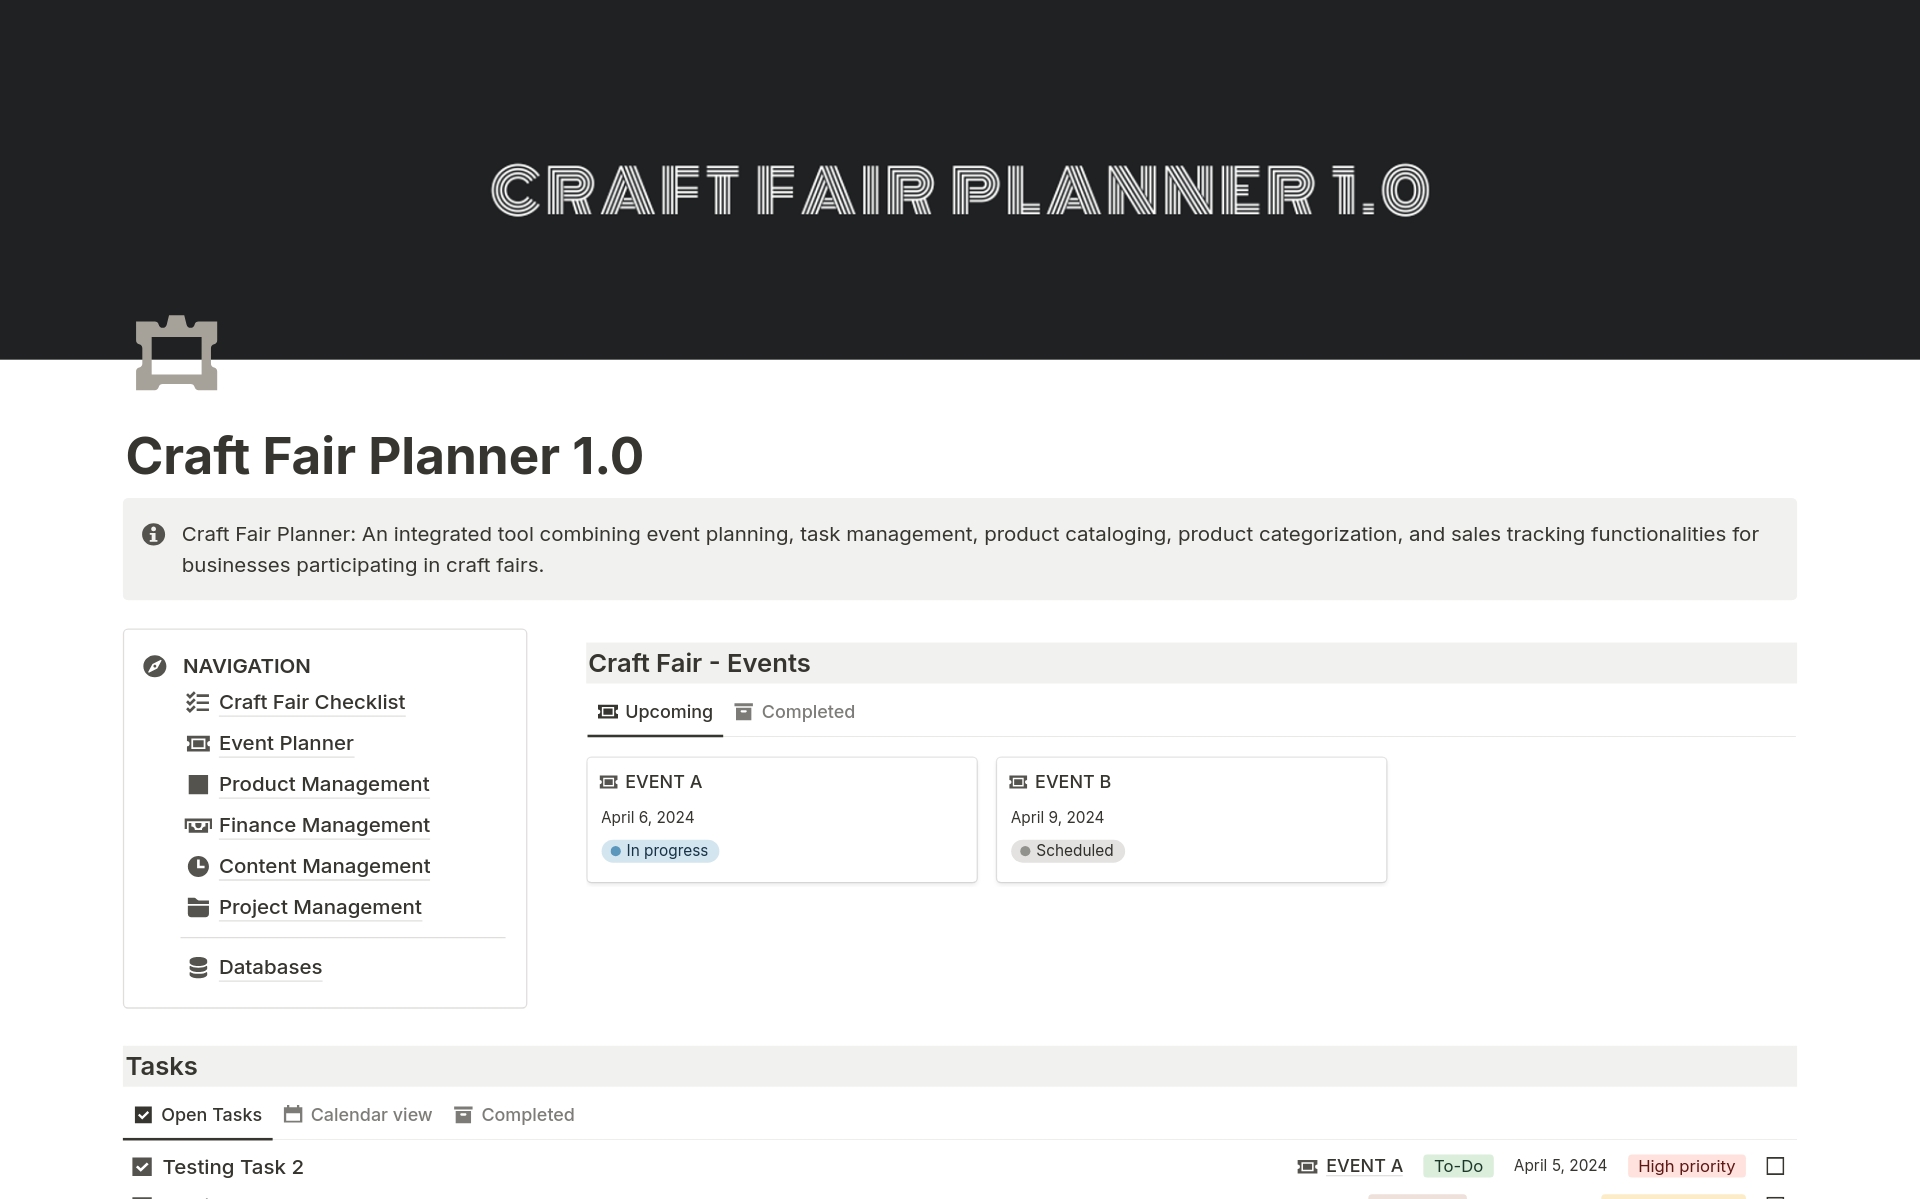 Craft Fair Planner: An integrated tool combining event planning, task management, product cataloging, product categorization, and sales tracking functionalities for businesses participating in craft fairs. 